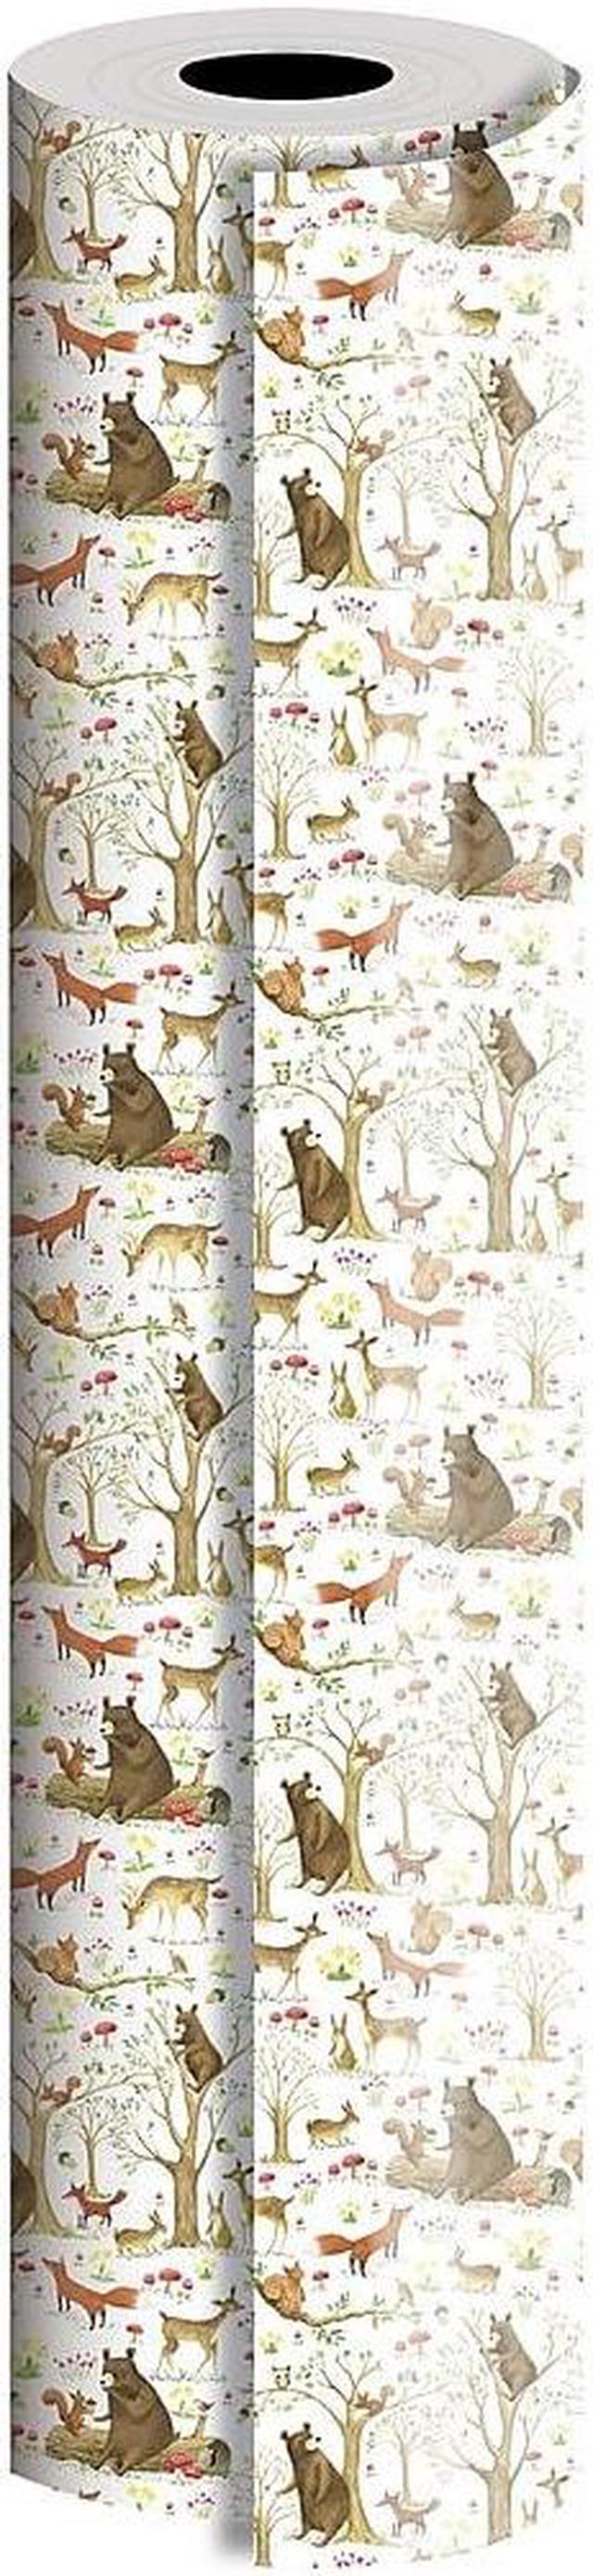 JAM Paper Industrial Size Bulk Wrapping Paper Rolls Fairytale Forest  165J28024417 